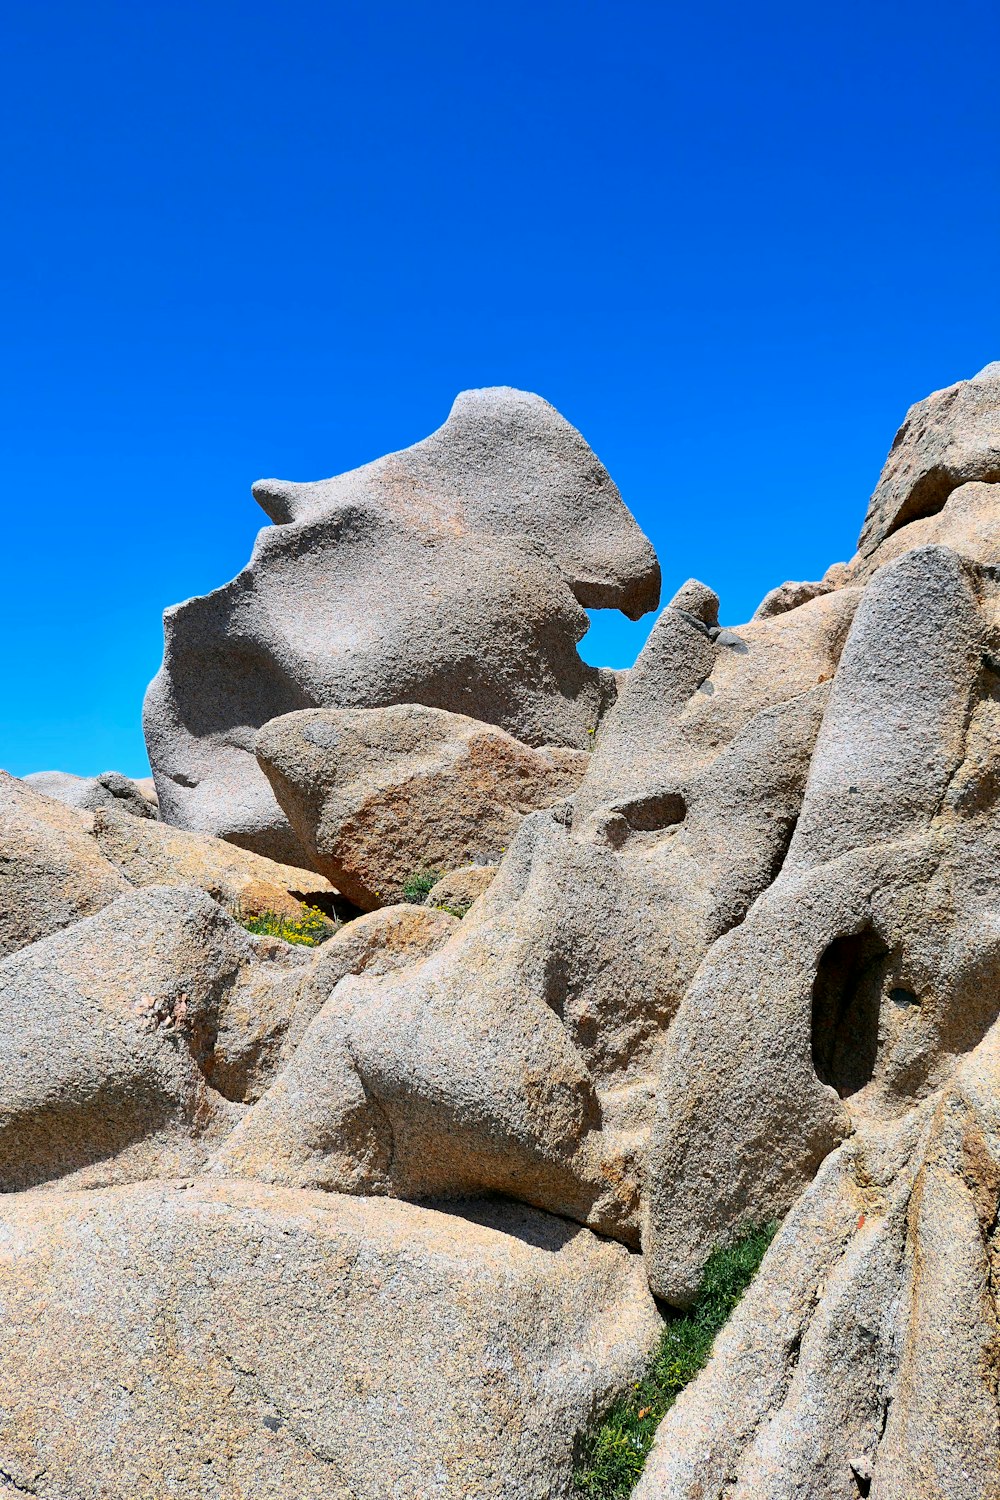 a rock formation with a blue sky in the background